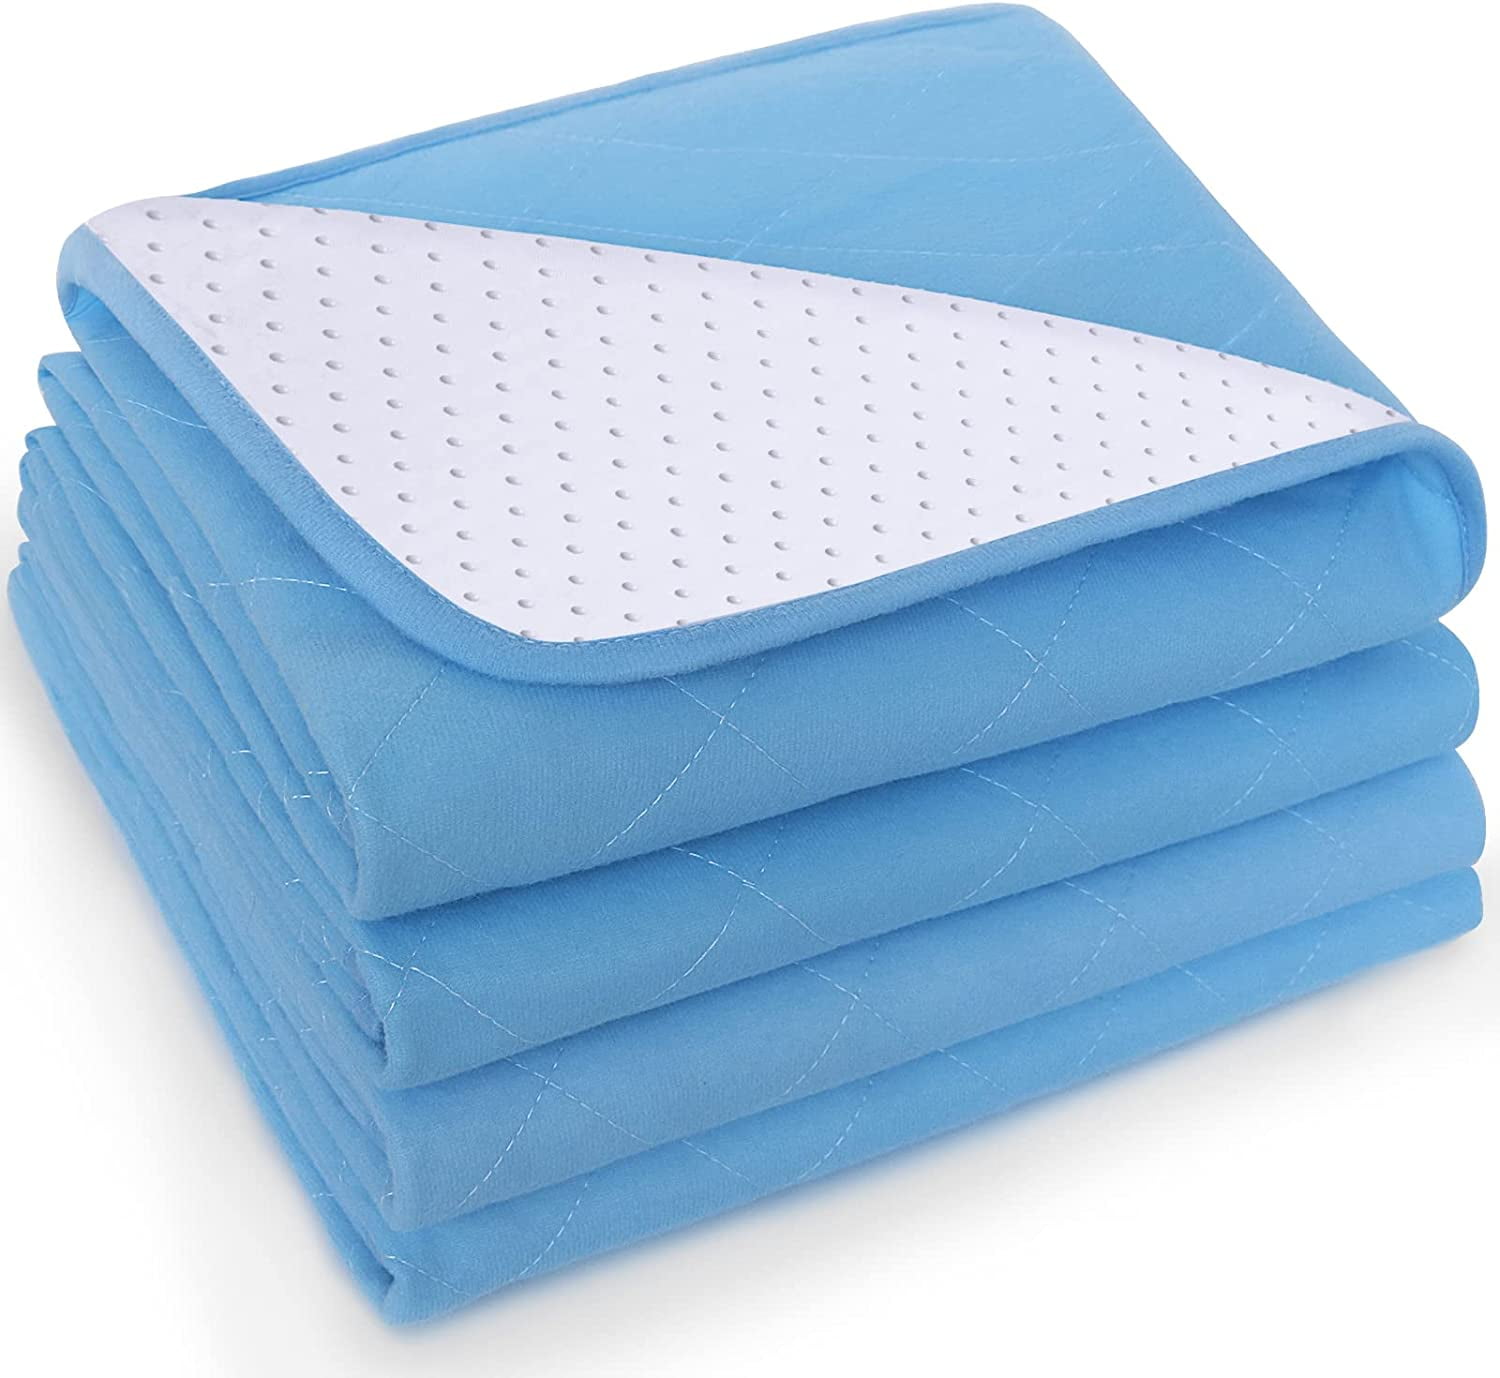 Bed Pads for Incontinence Washable Large (34 inch 52 inch), Reusable Waterproof Bed Underpads with Non-Slip Back for Elderly, Kids, Women or Pets